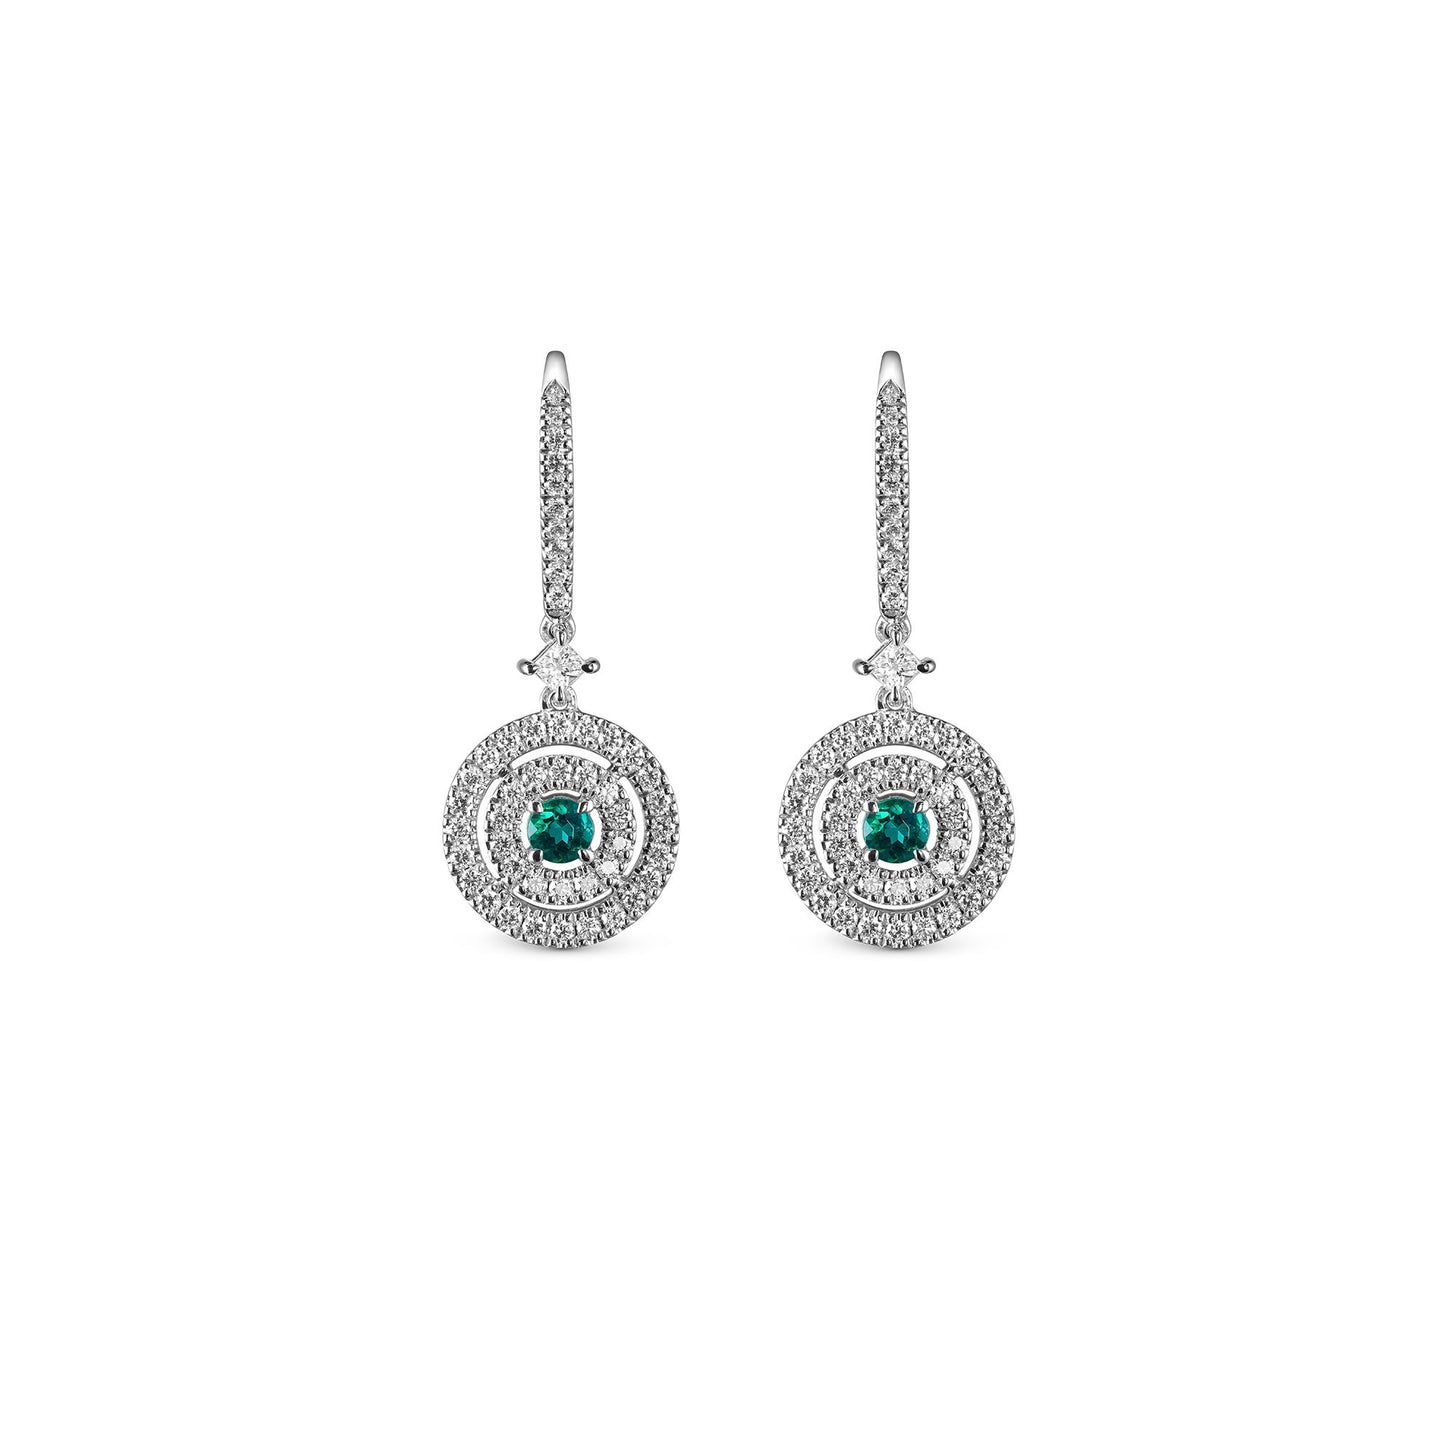 Platinum Drop Earrings with Emerald and Diamonds